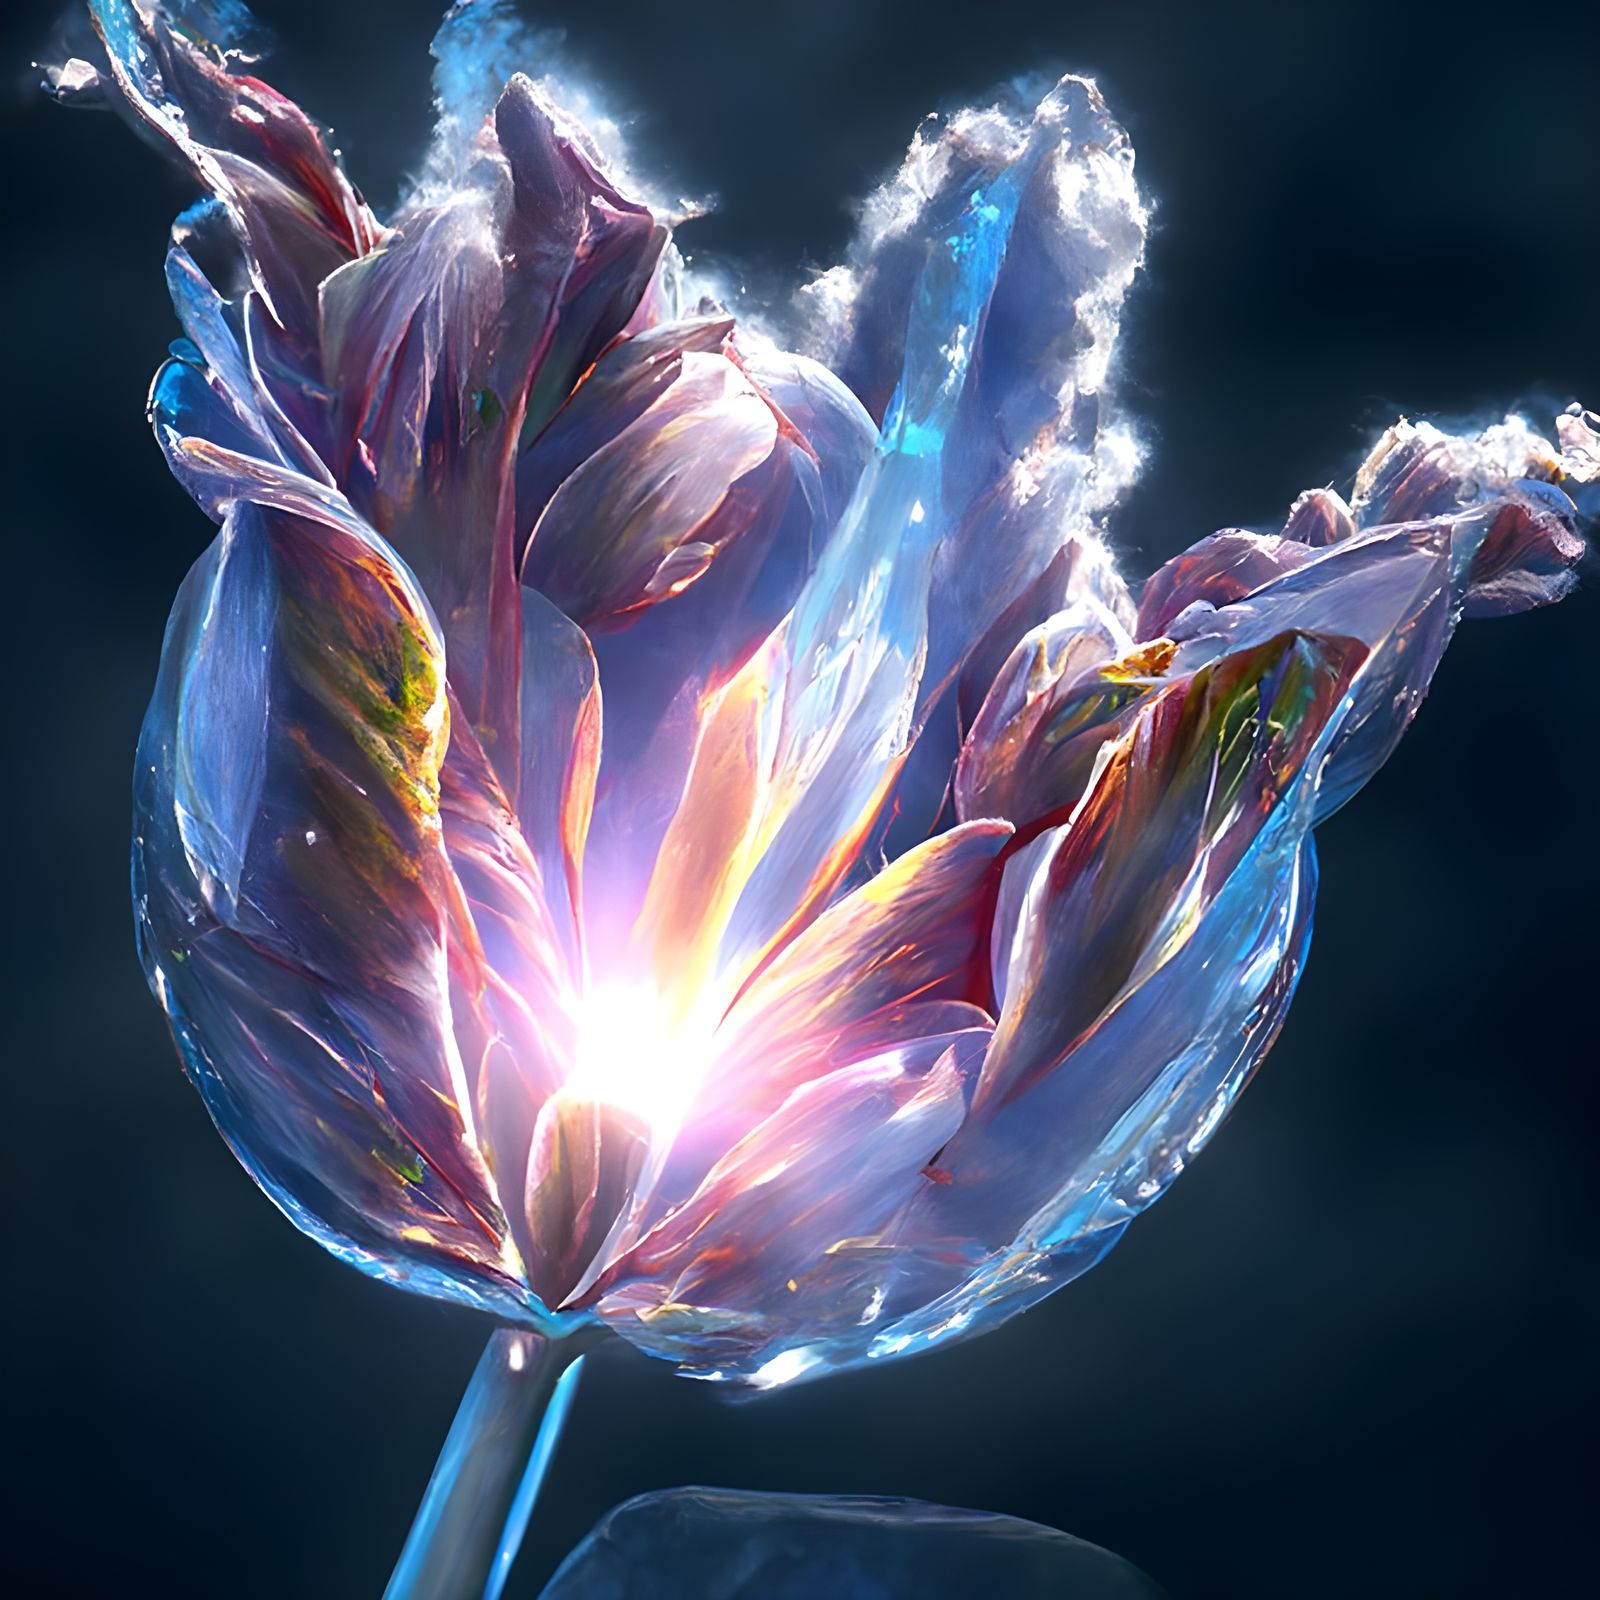 the lonely tulip shed a crystal tear, from which a glowing Teardrop Tulip came to life🌷